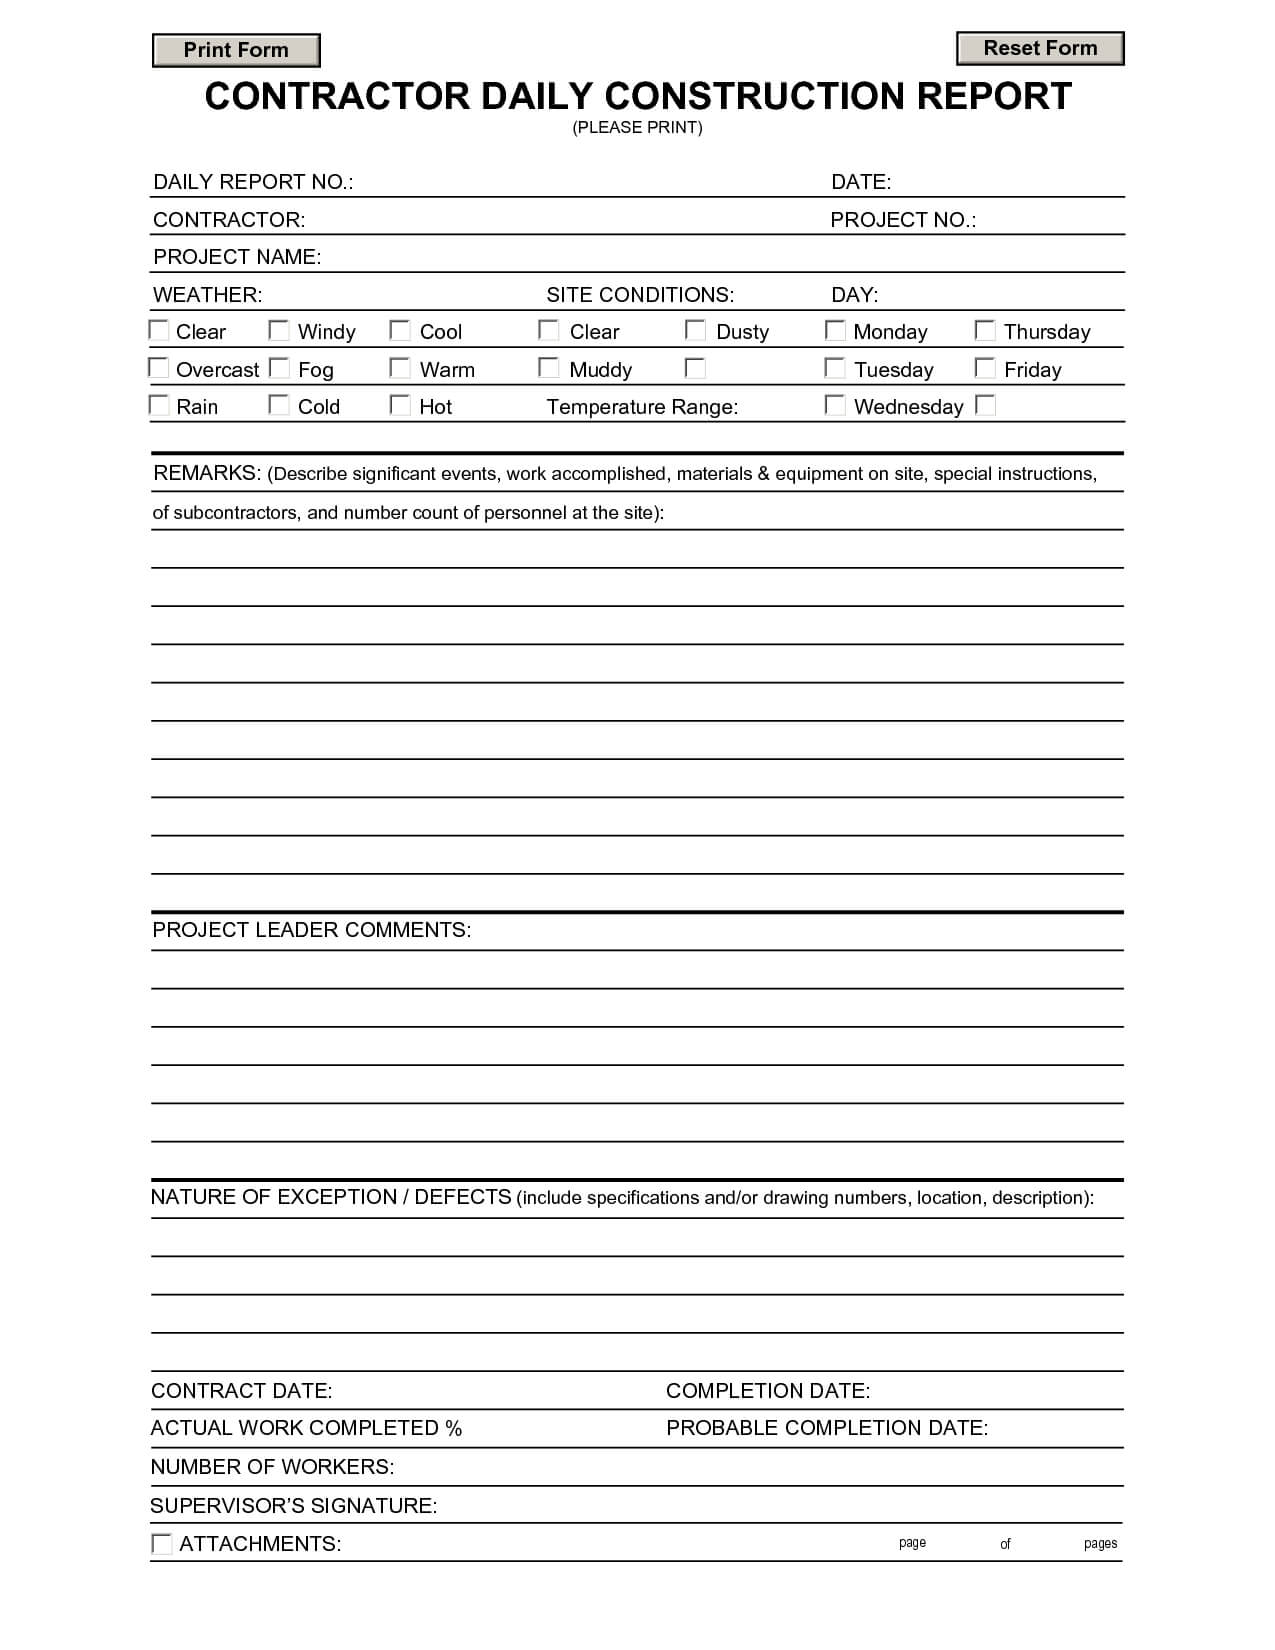 Construction Daily Report Template Ontractors Progress Excel In Superintendent Daily Report Template